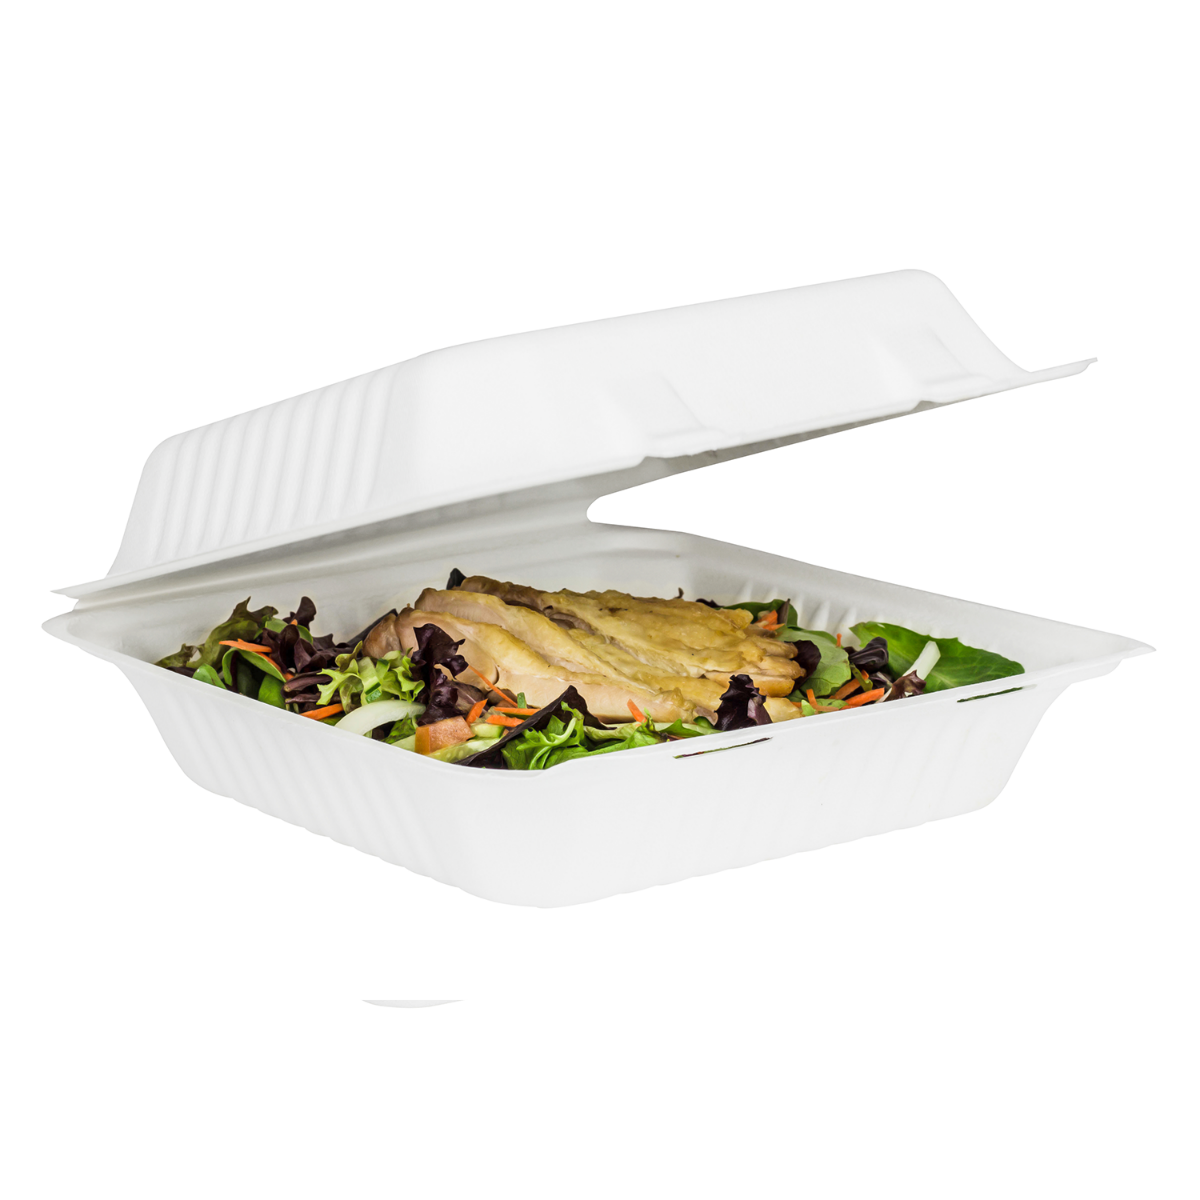 Footprint Launches PFAS-Free, Compostable, Clamshell To-Go Food Container